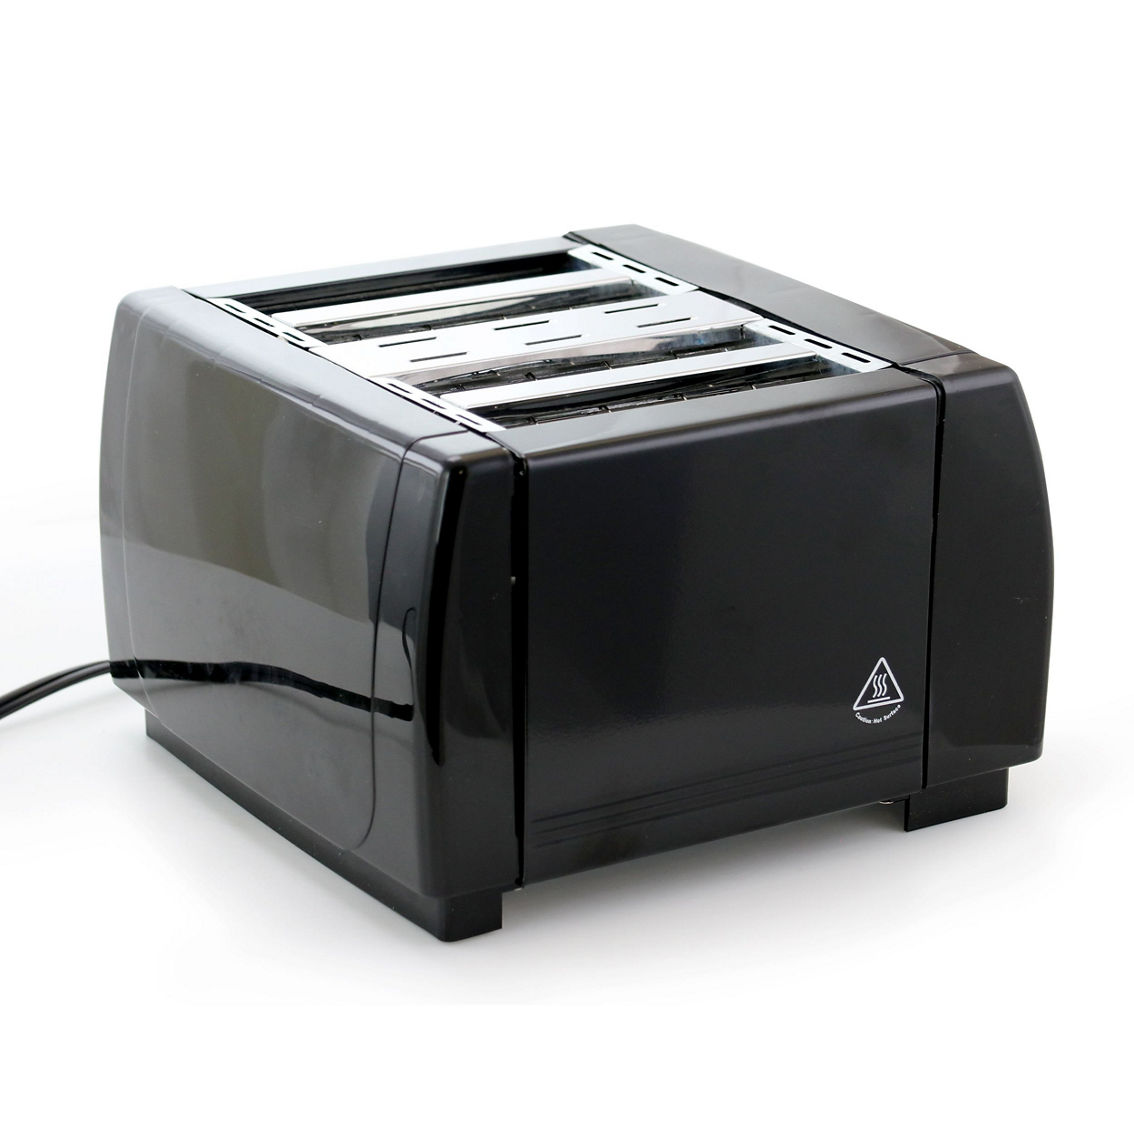 Better Chef 4 Slice Dual Control Toaster in Black - Image 2 of 5